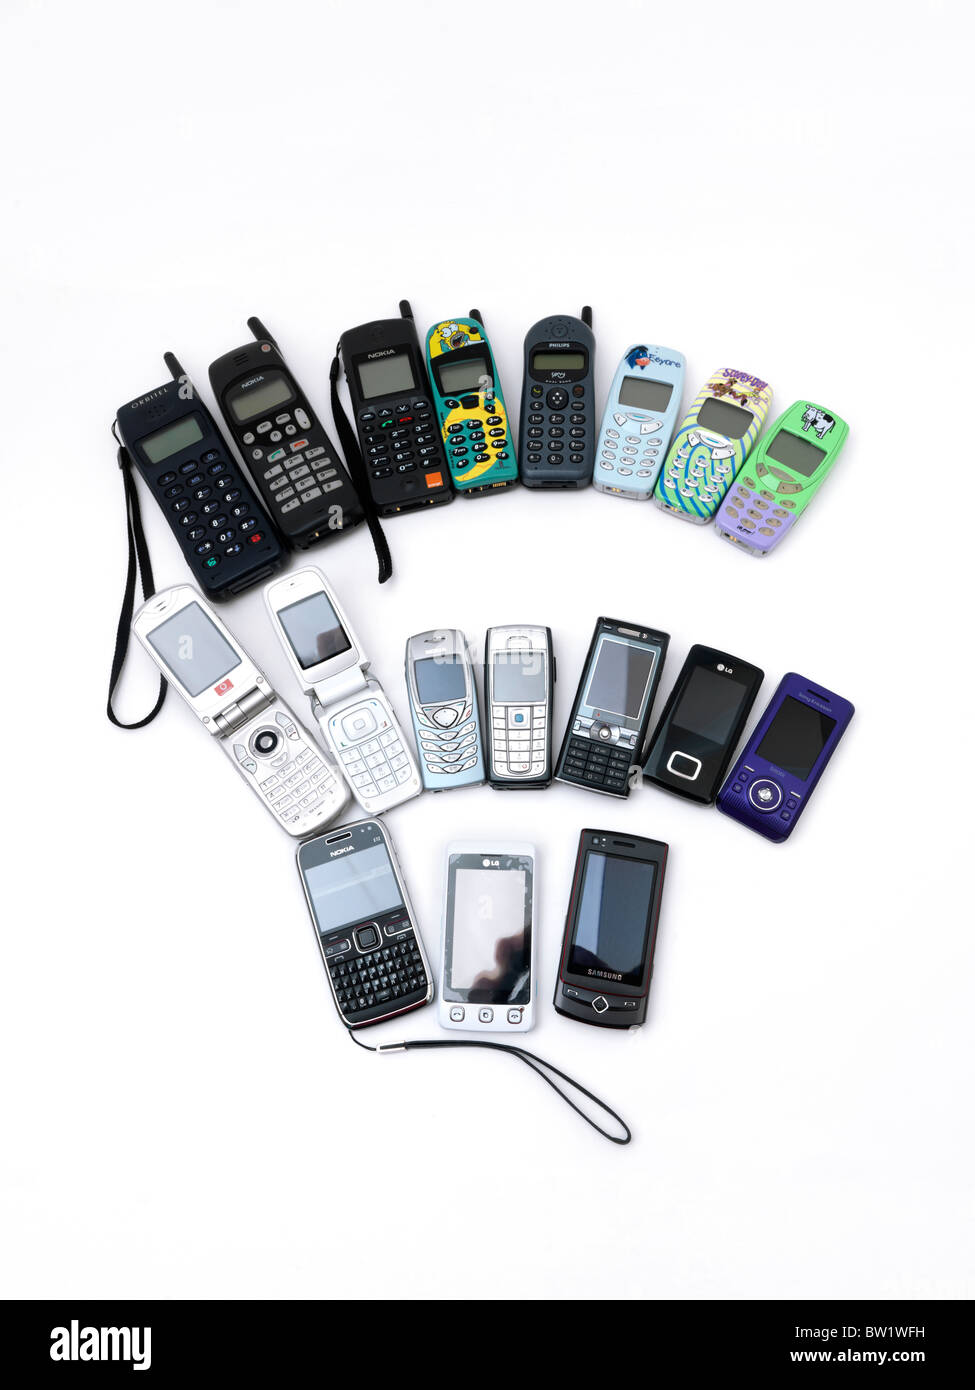 Old And New Mobile Phones Fanned Out Nokia, LG, Samsung, Motorola, Phillips, Sony Ericsson Stock Photo